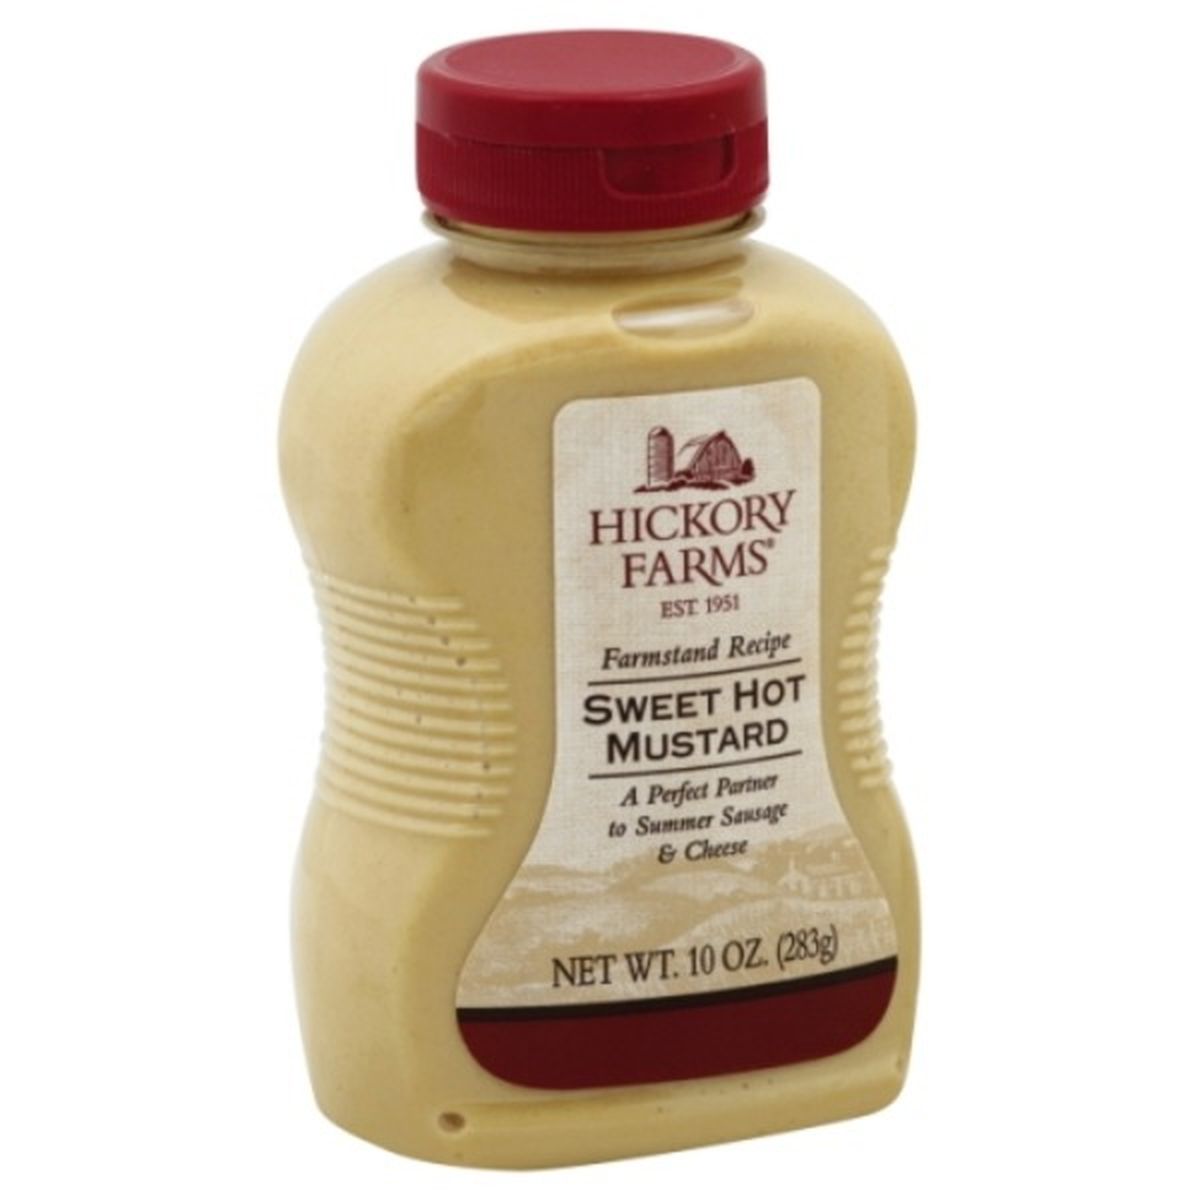 Calories in Hickory Farms Mustard, Sweet Hot